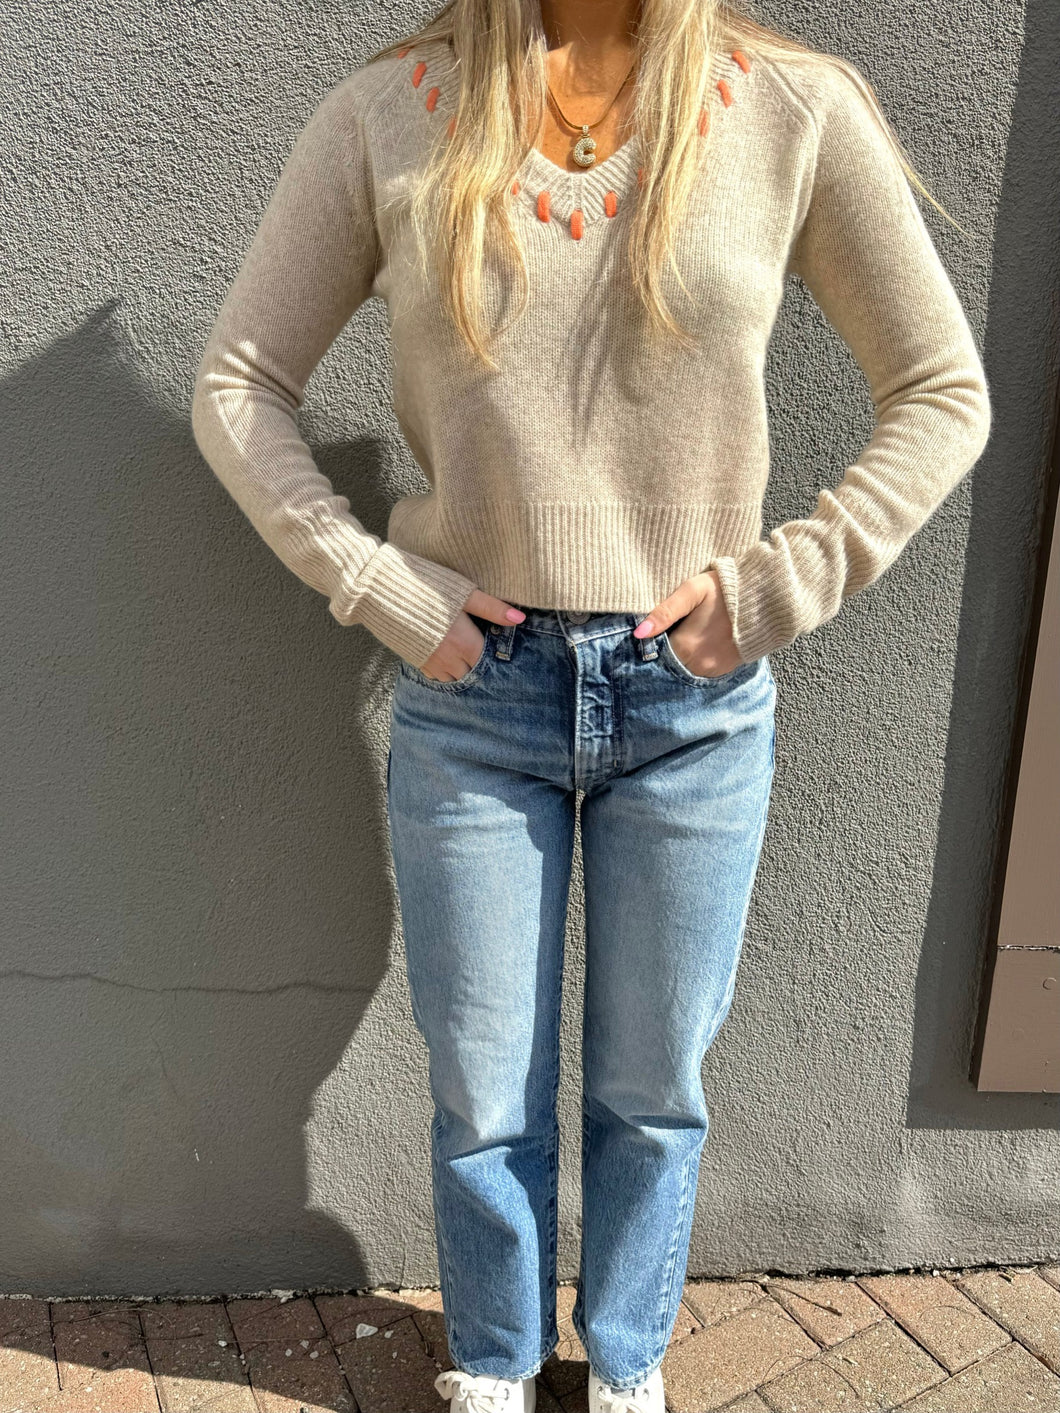 One Grey Day baseball stitch cashmere vneck sweater and moussy jeans at west2westport.com